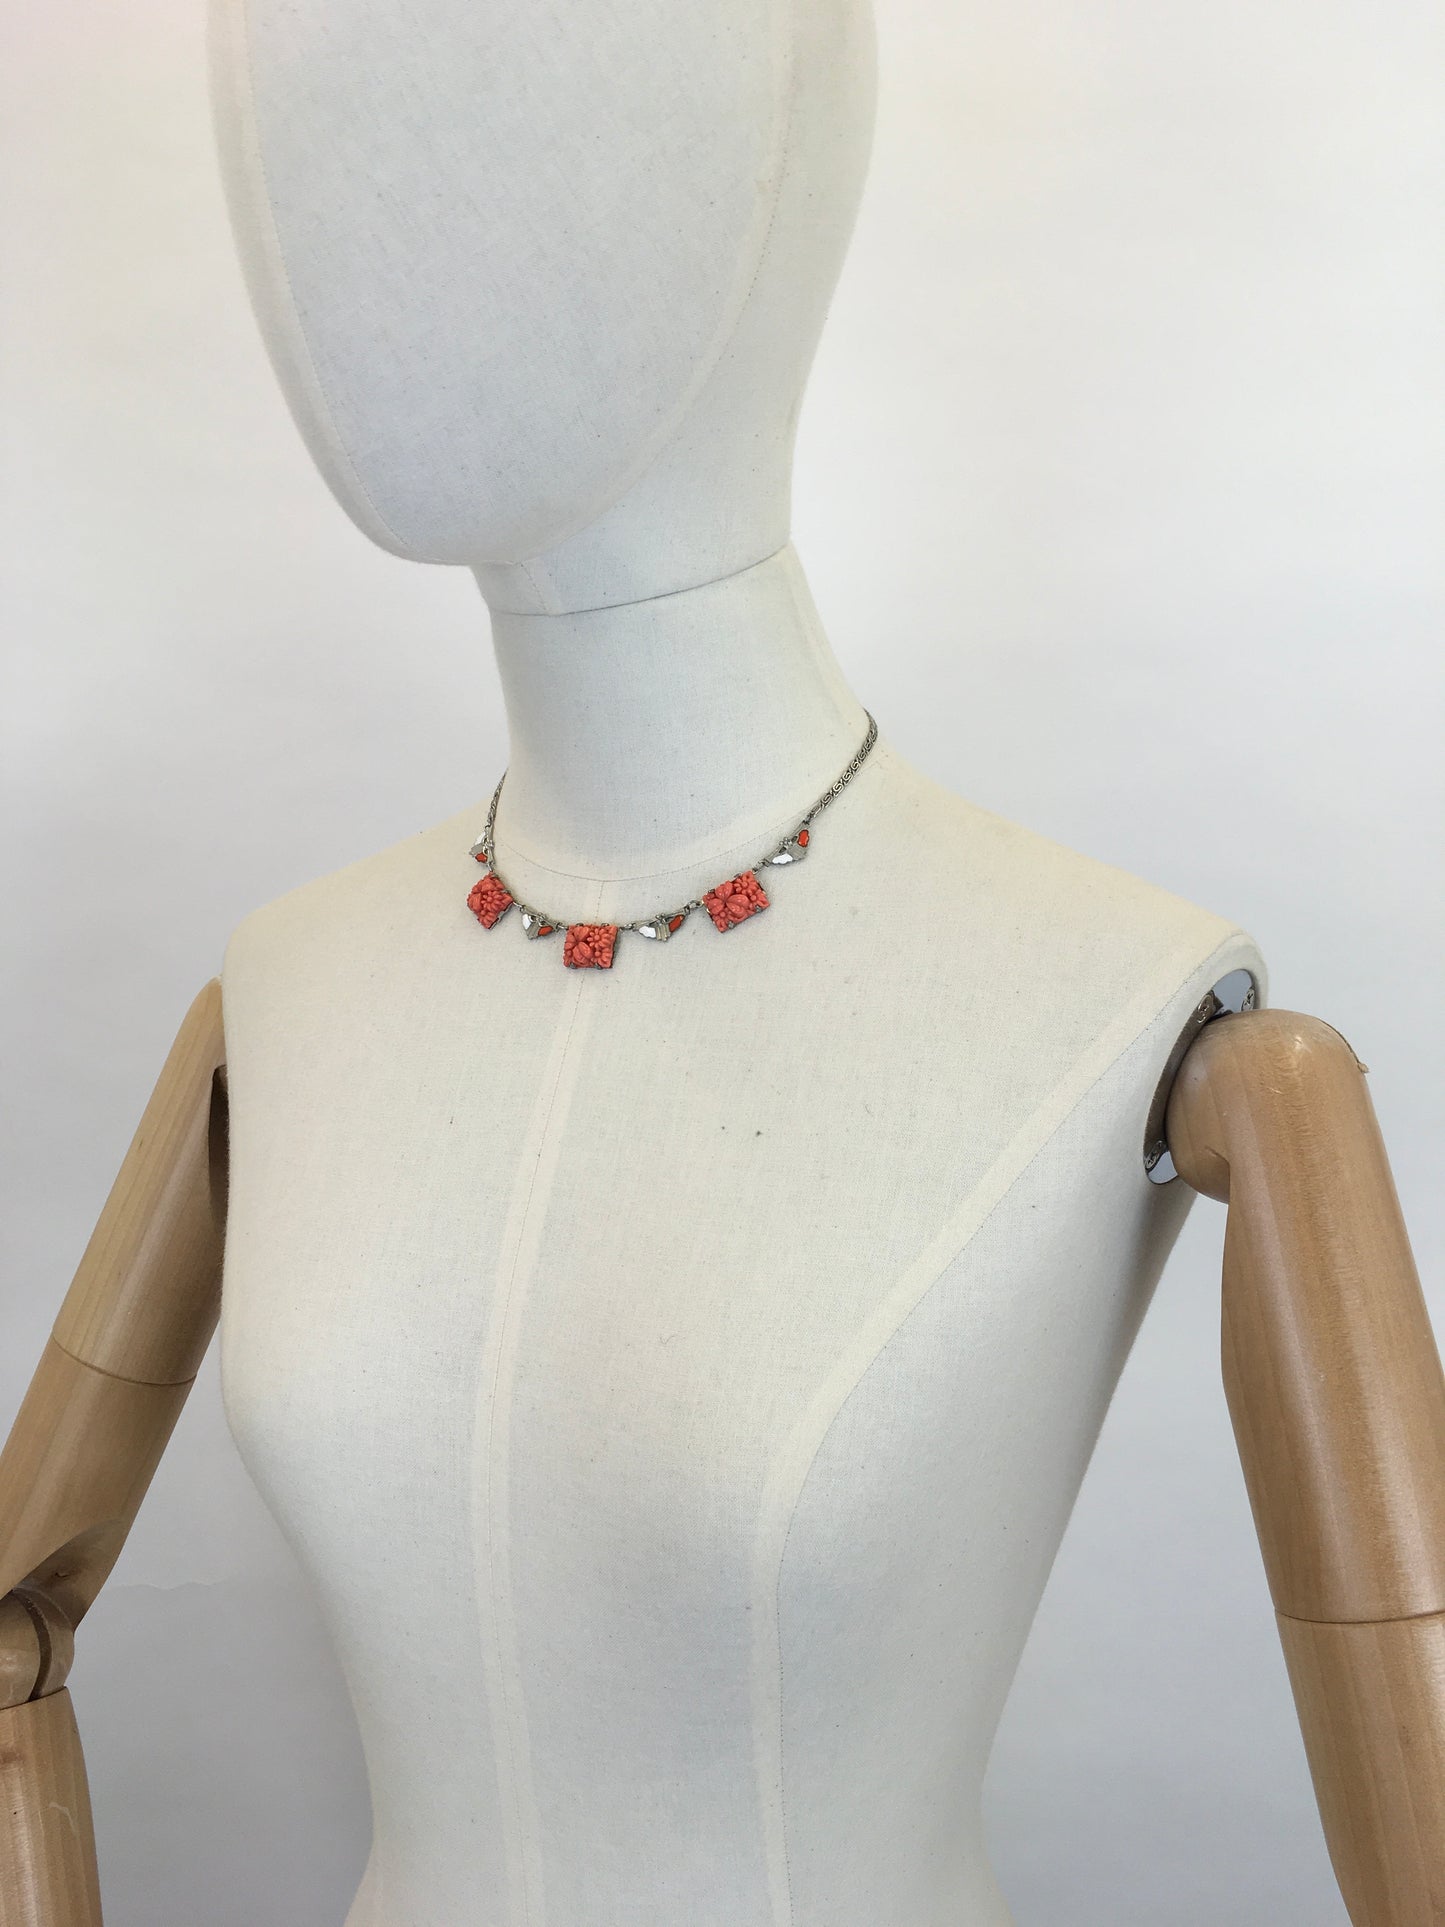 Original 1930s Coral Pressed Glass & Enamel Necklace - With Intricate Deco Detailing